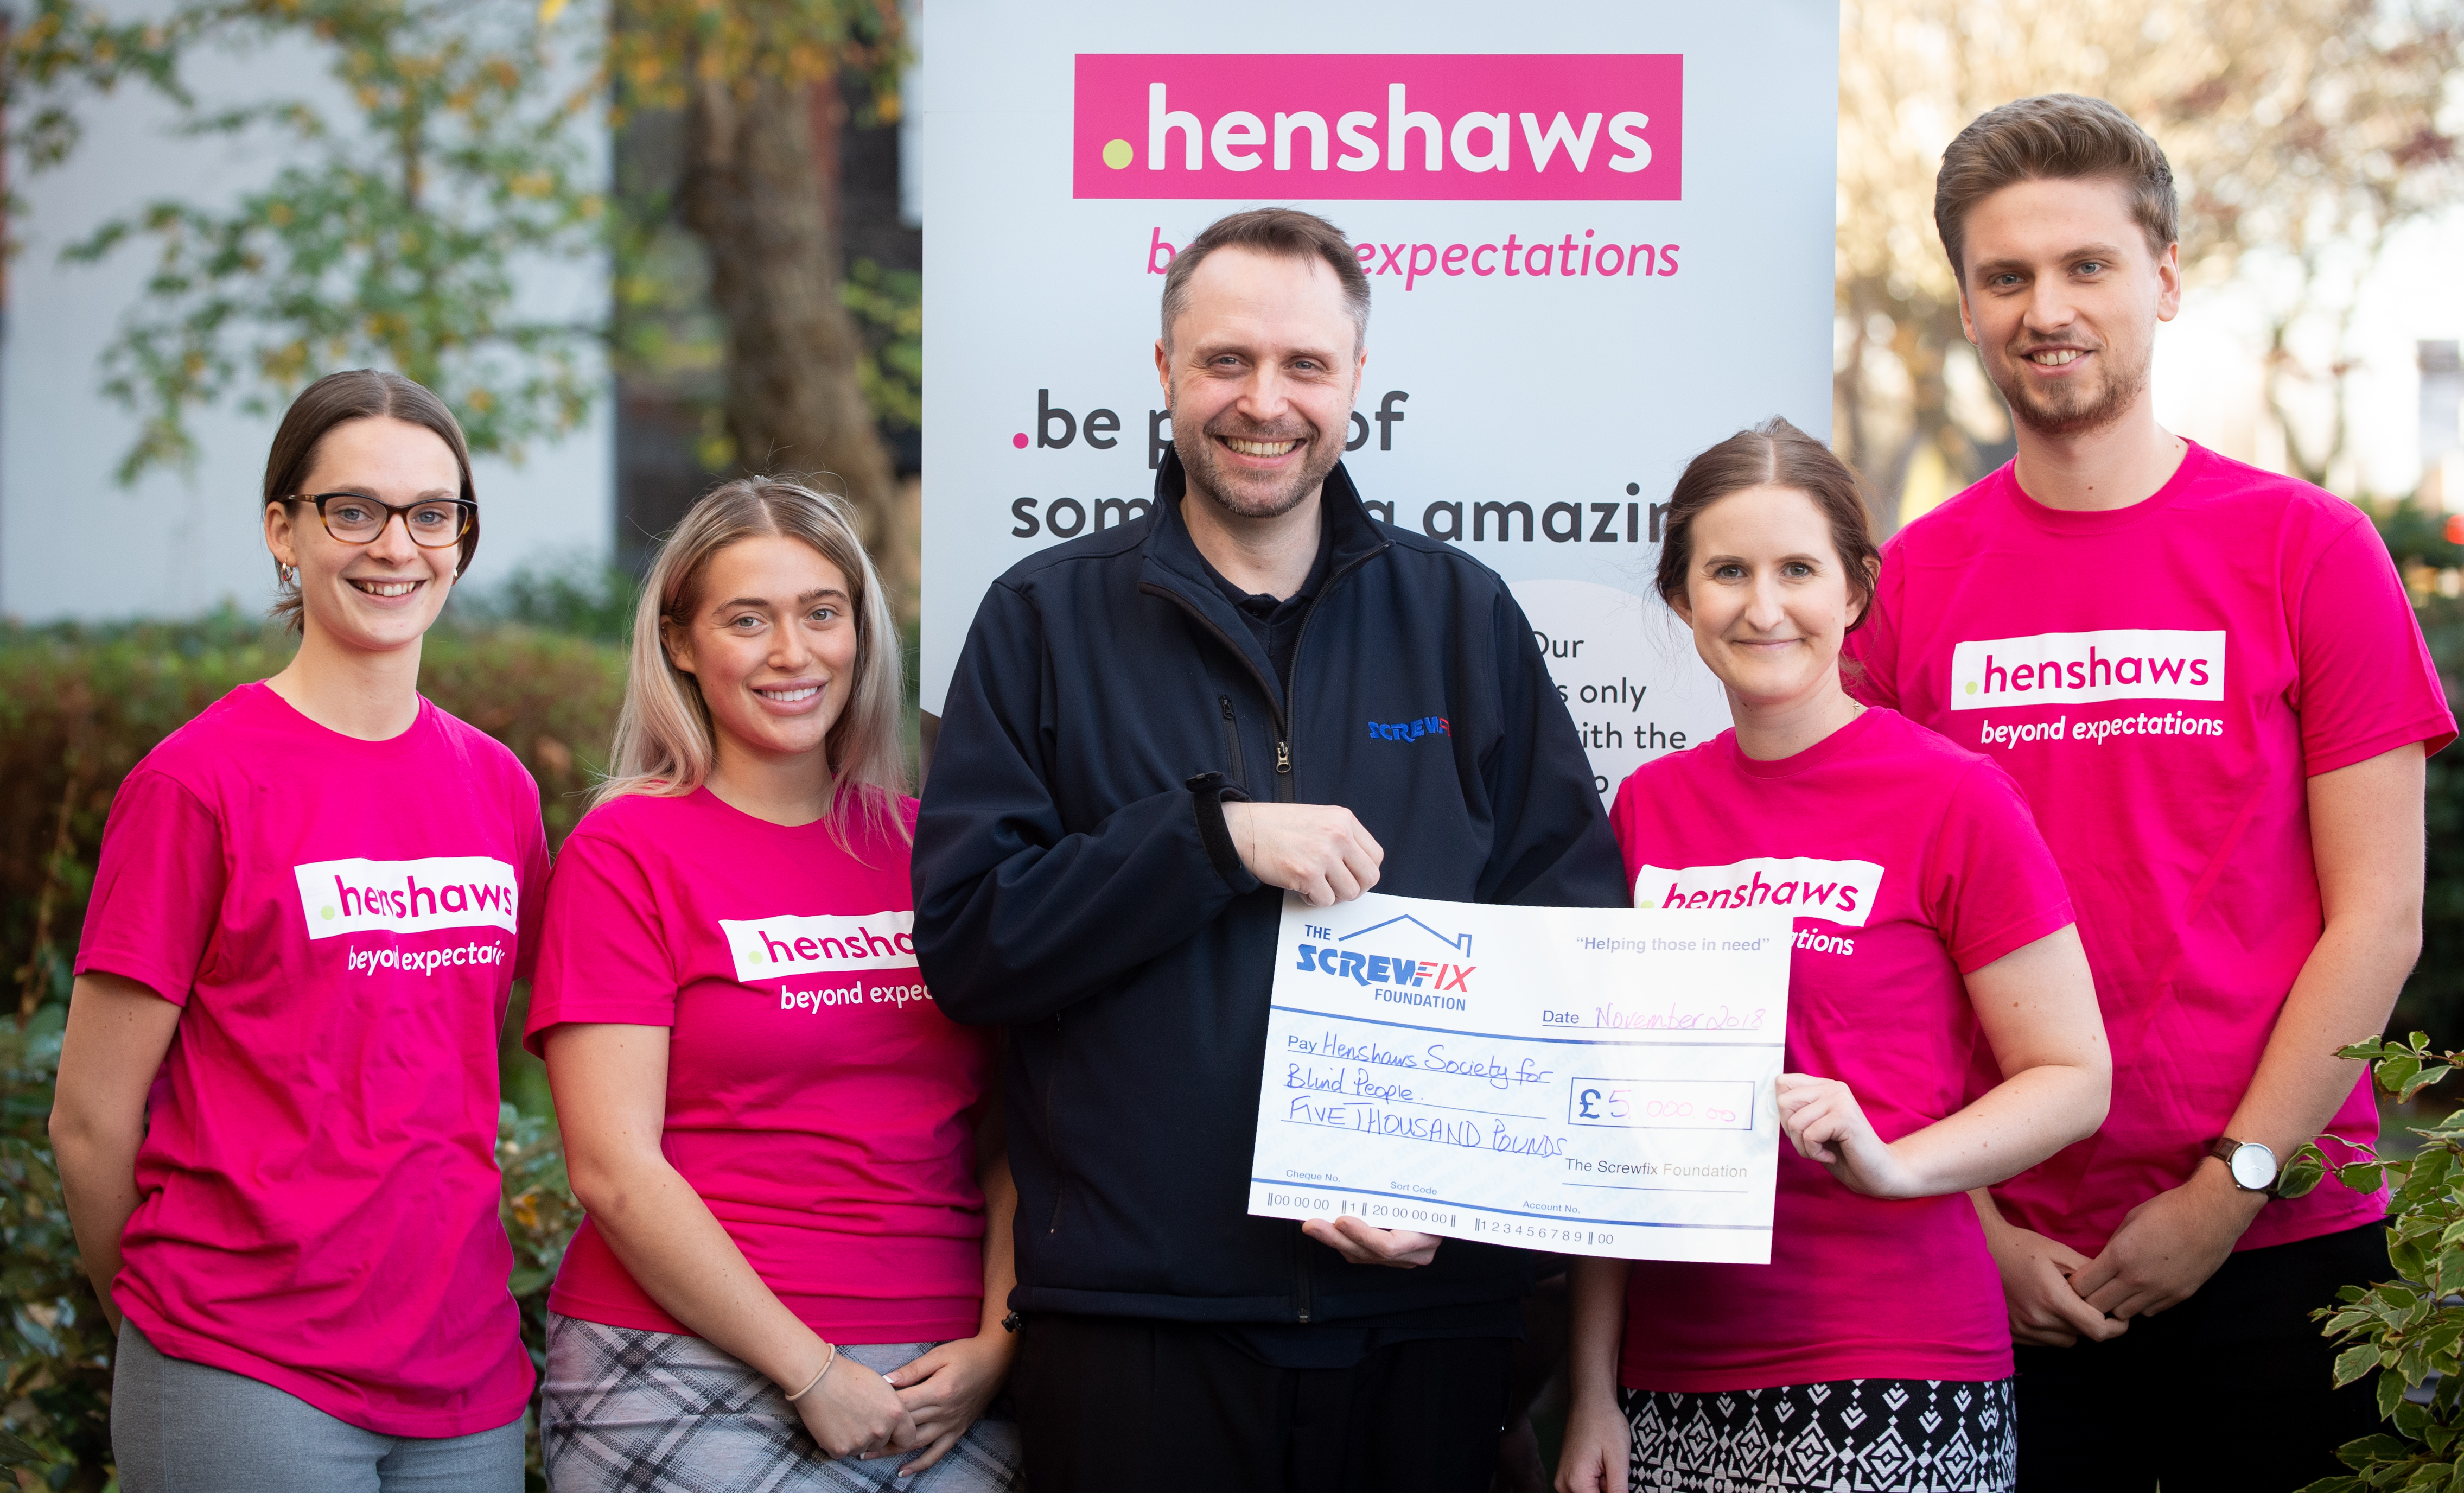 The Screwfix Foundation supports Henshaws Society for the Blind at their Harrogate centre